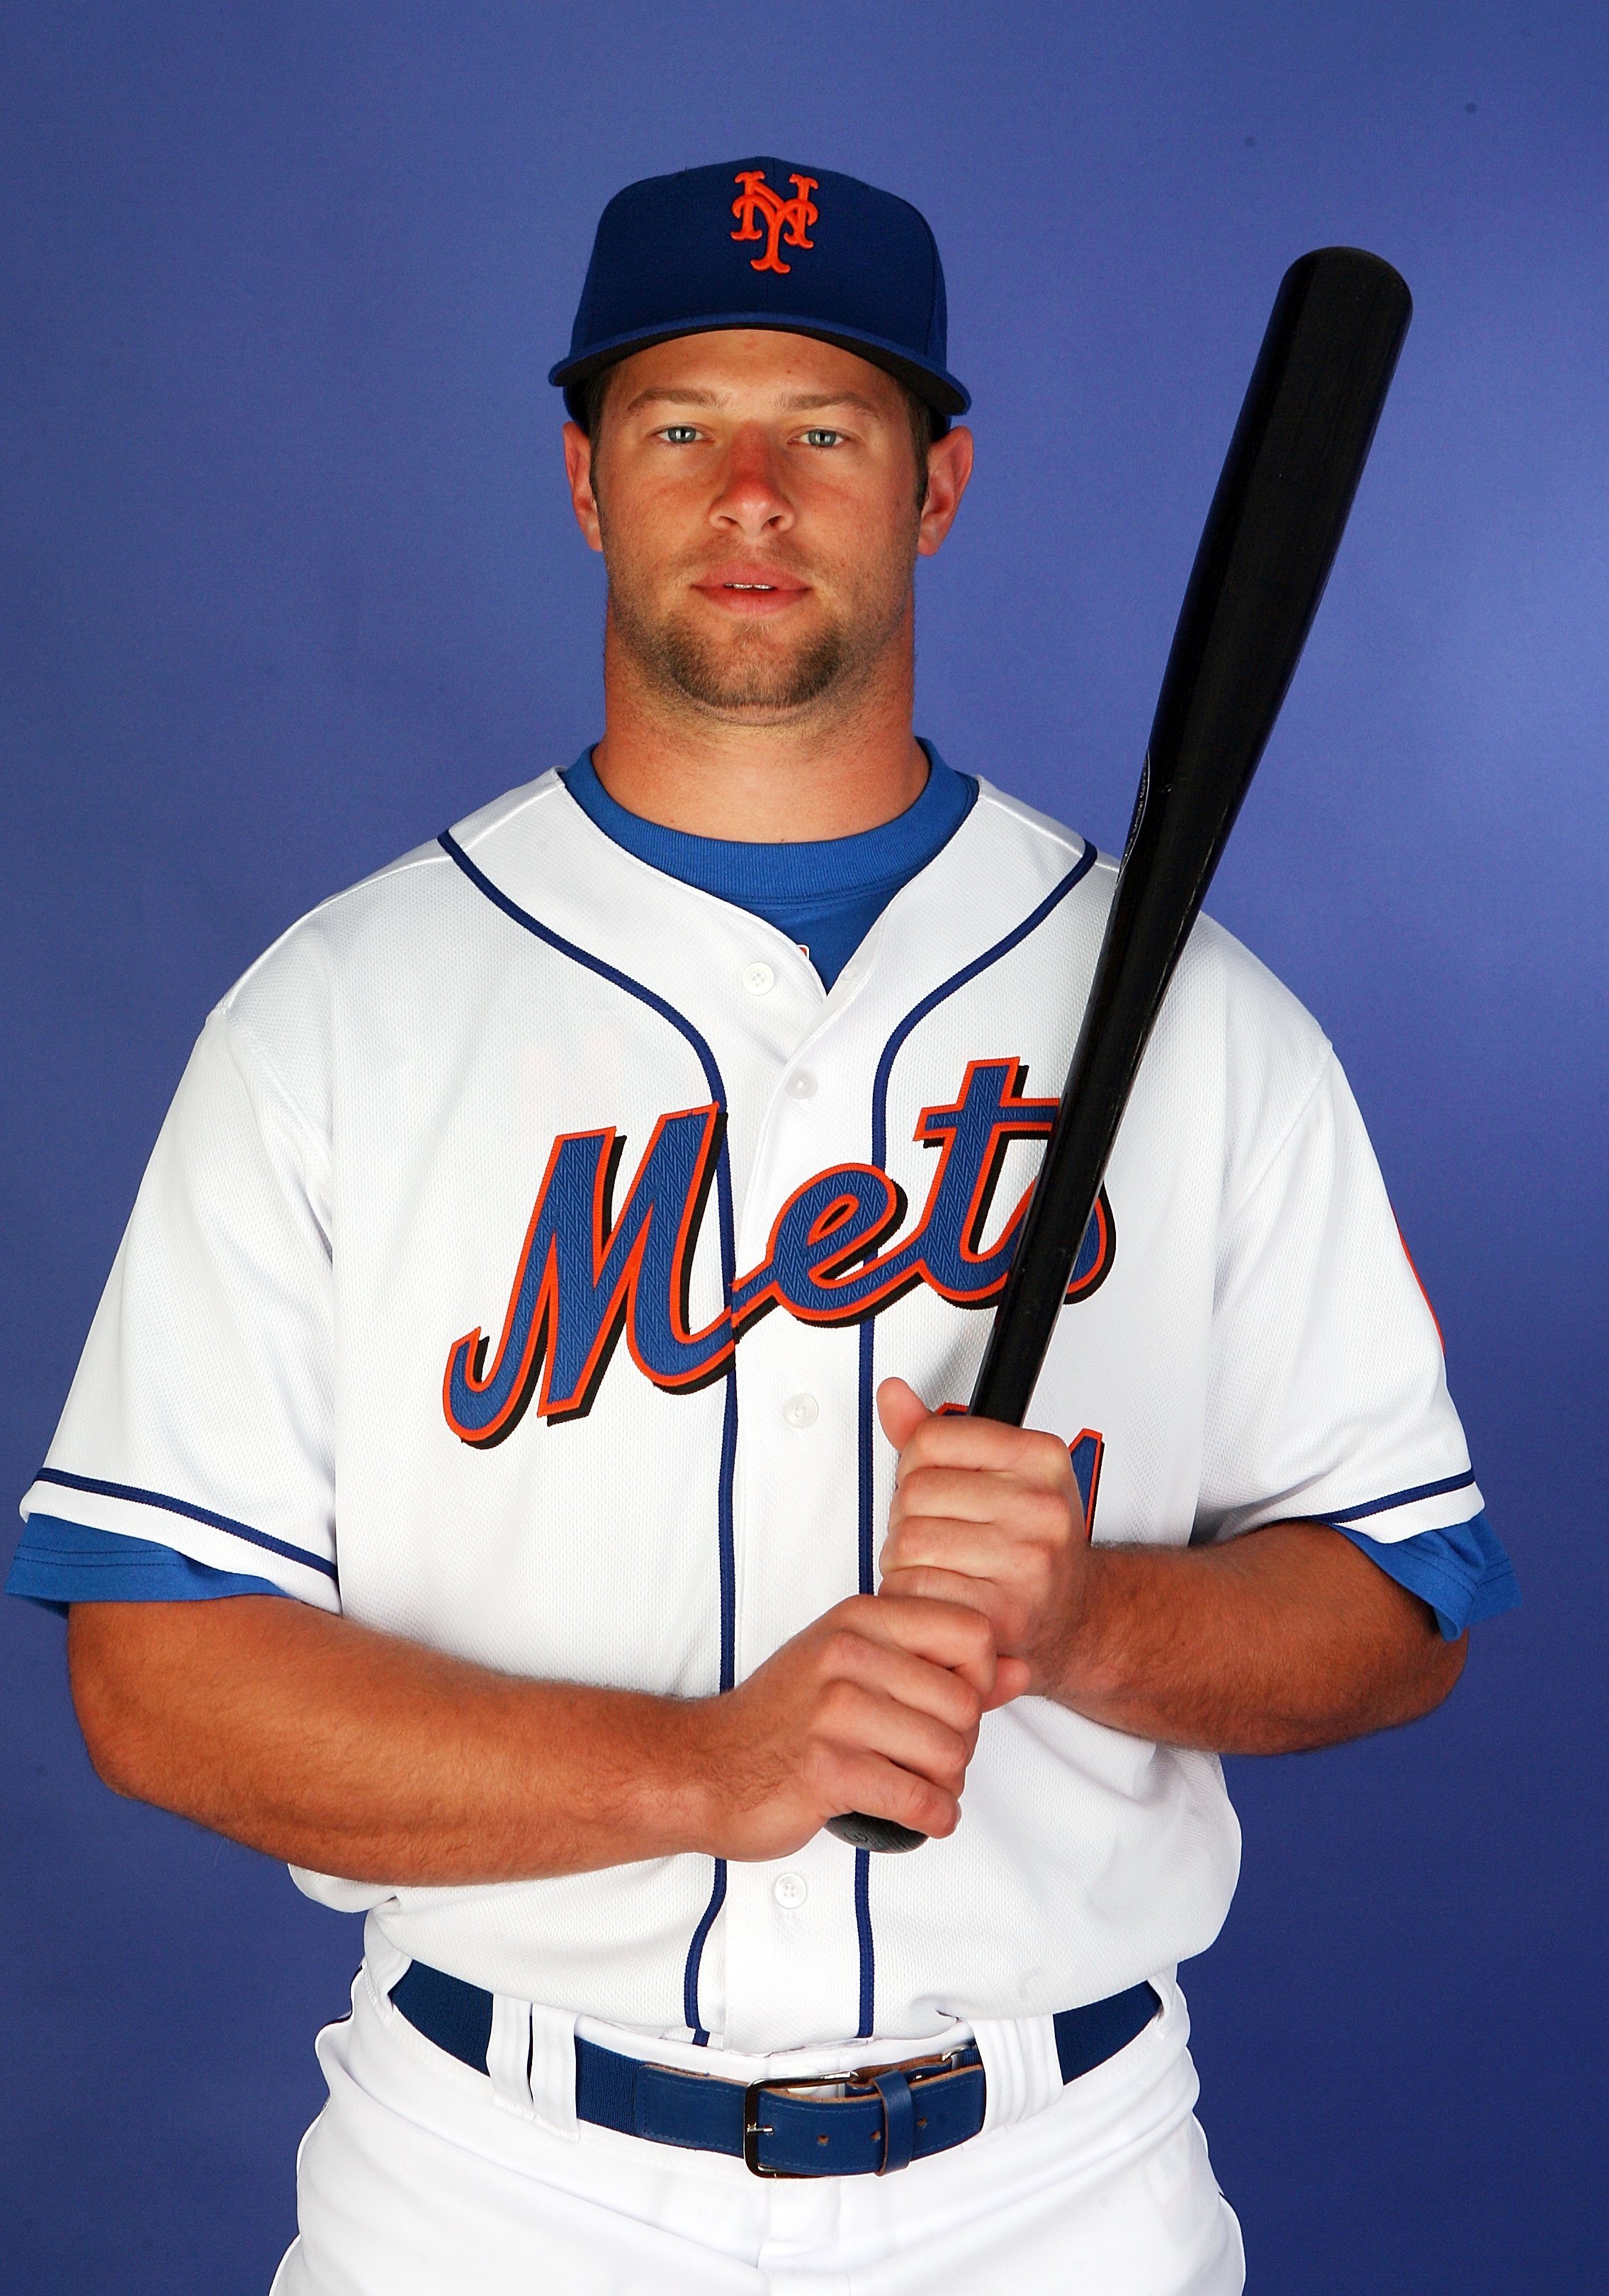 PORT ST. LUCIE, FL - FEBRUARY 27:  Outfielder Kirk Nieuwenhuis #91 of the New York Mets poses during photo day at Tradition Field on February 27, 2010 in Port St. Lucie, Florida.  (Photo by Doug Benc/Getty Images)